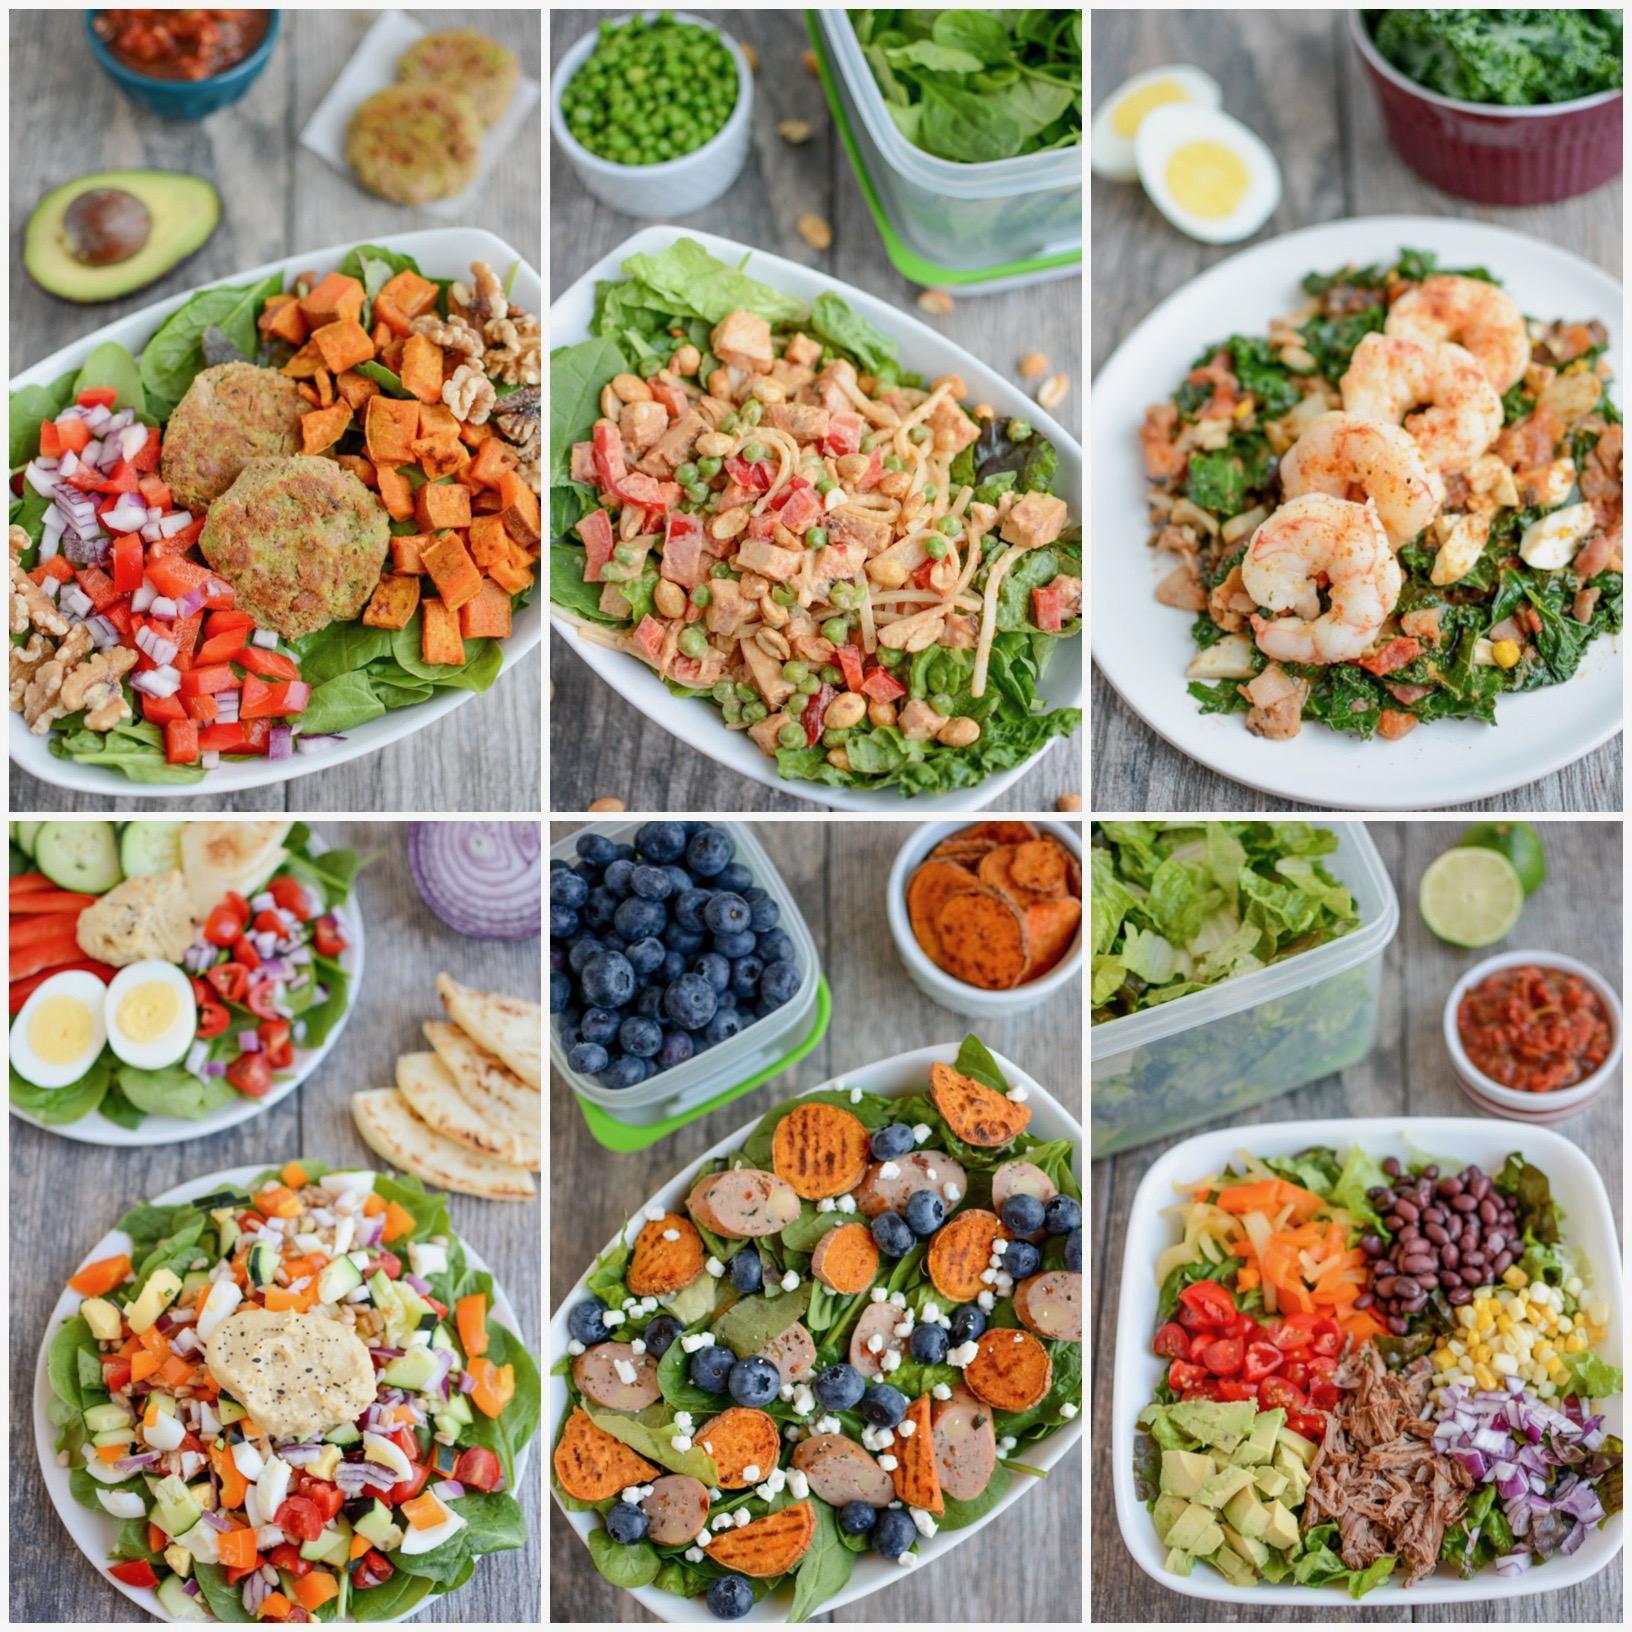 Salad Topping Ideas